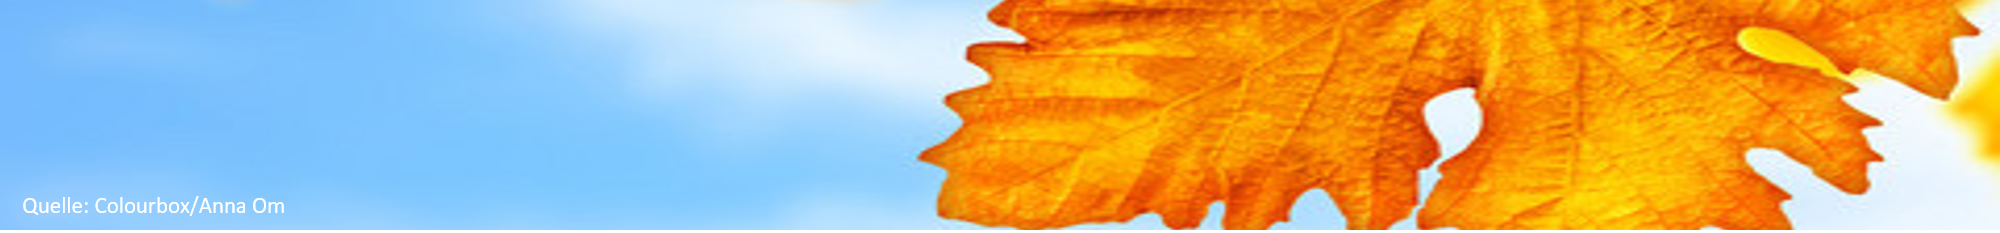 Herbst_Banner.png